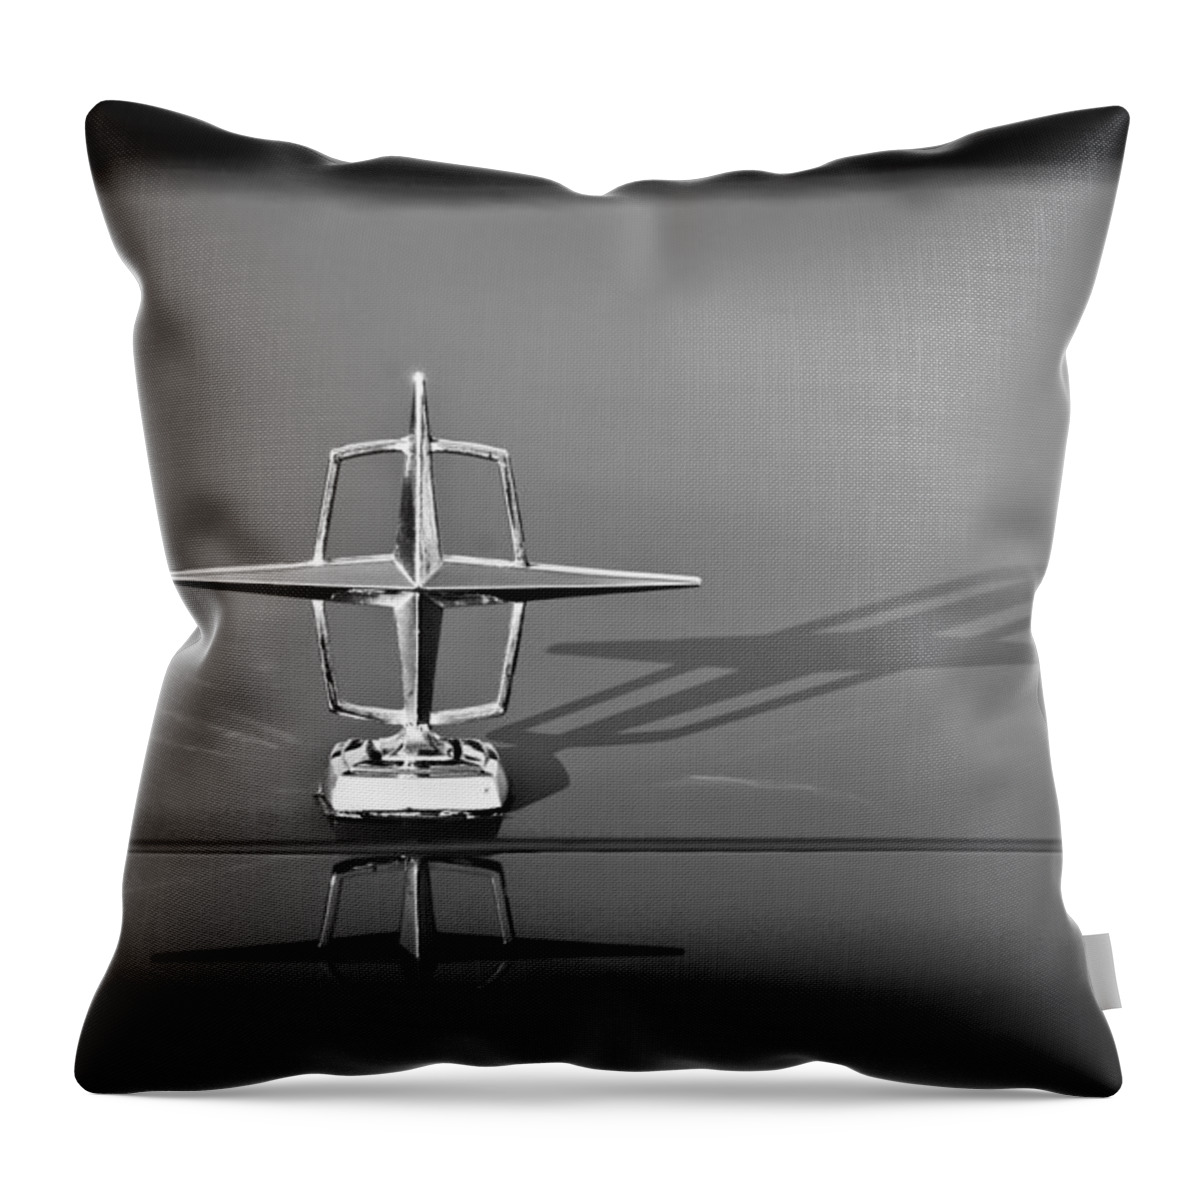 1967 Lincoln Continental Hood Ornament Throw Pillow featuring the photograph 1967 Lincoln Continental Hood Ornament -158bw by Jill Reger